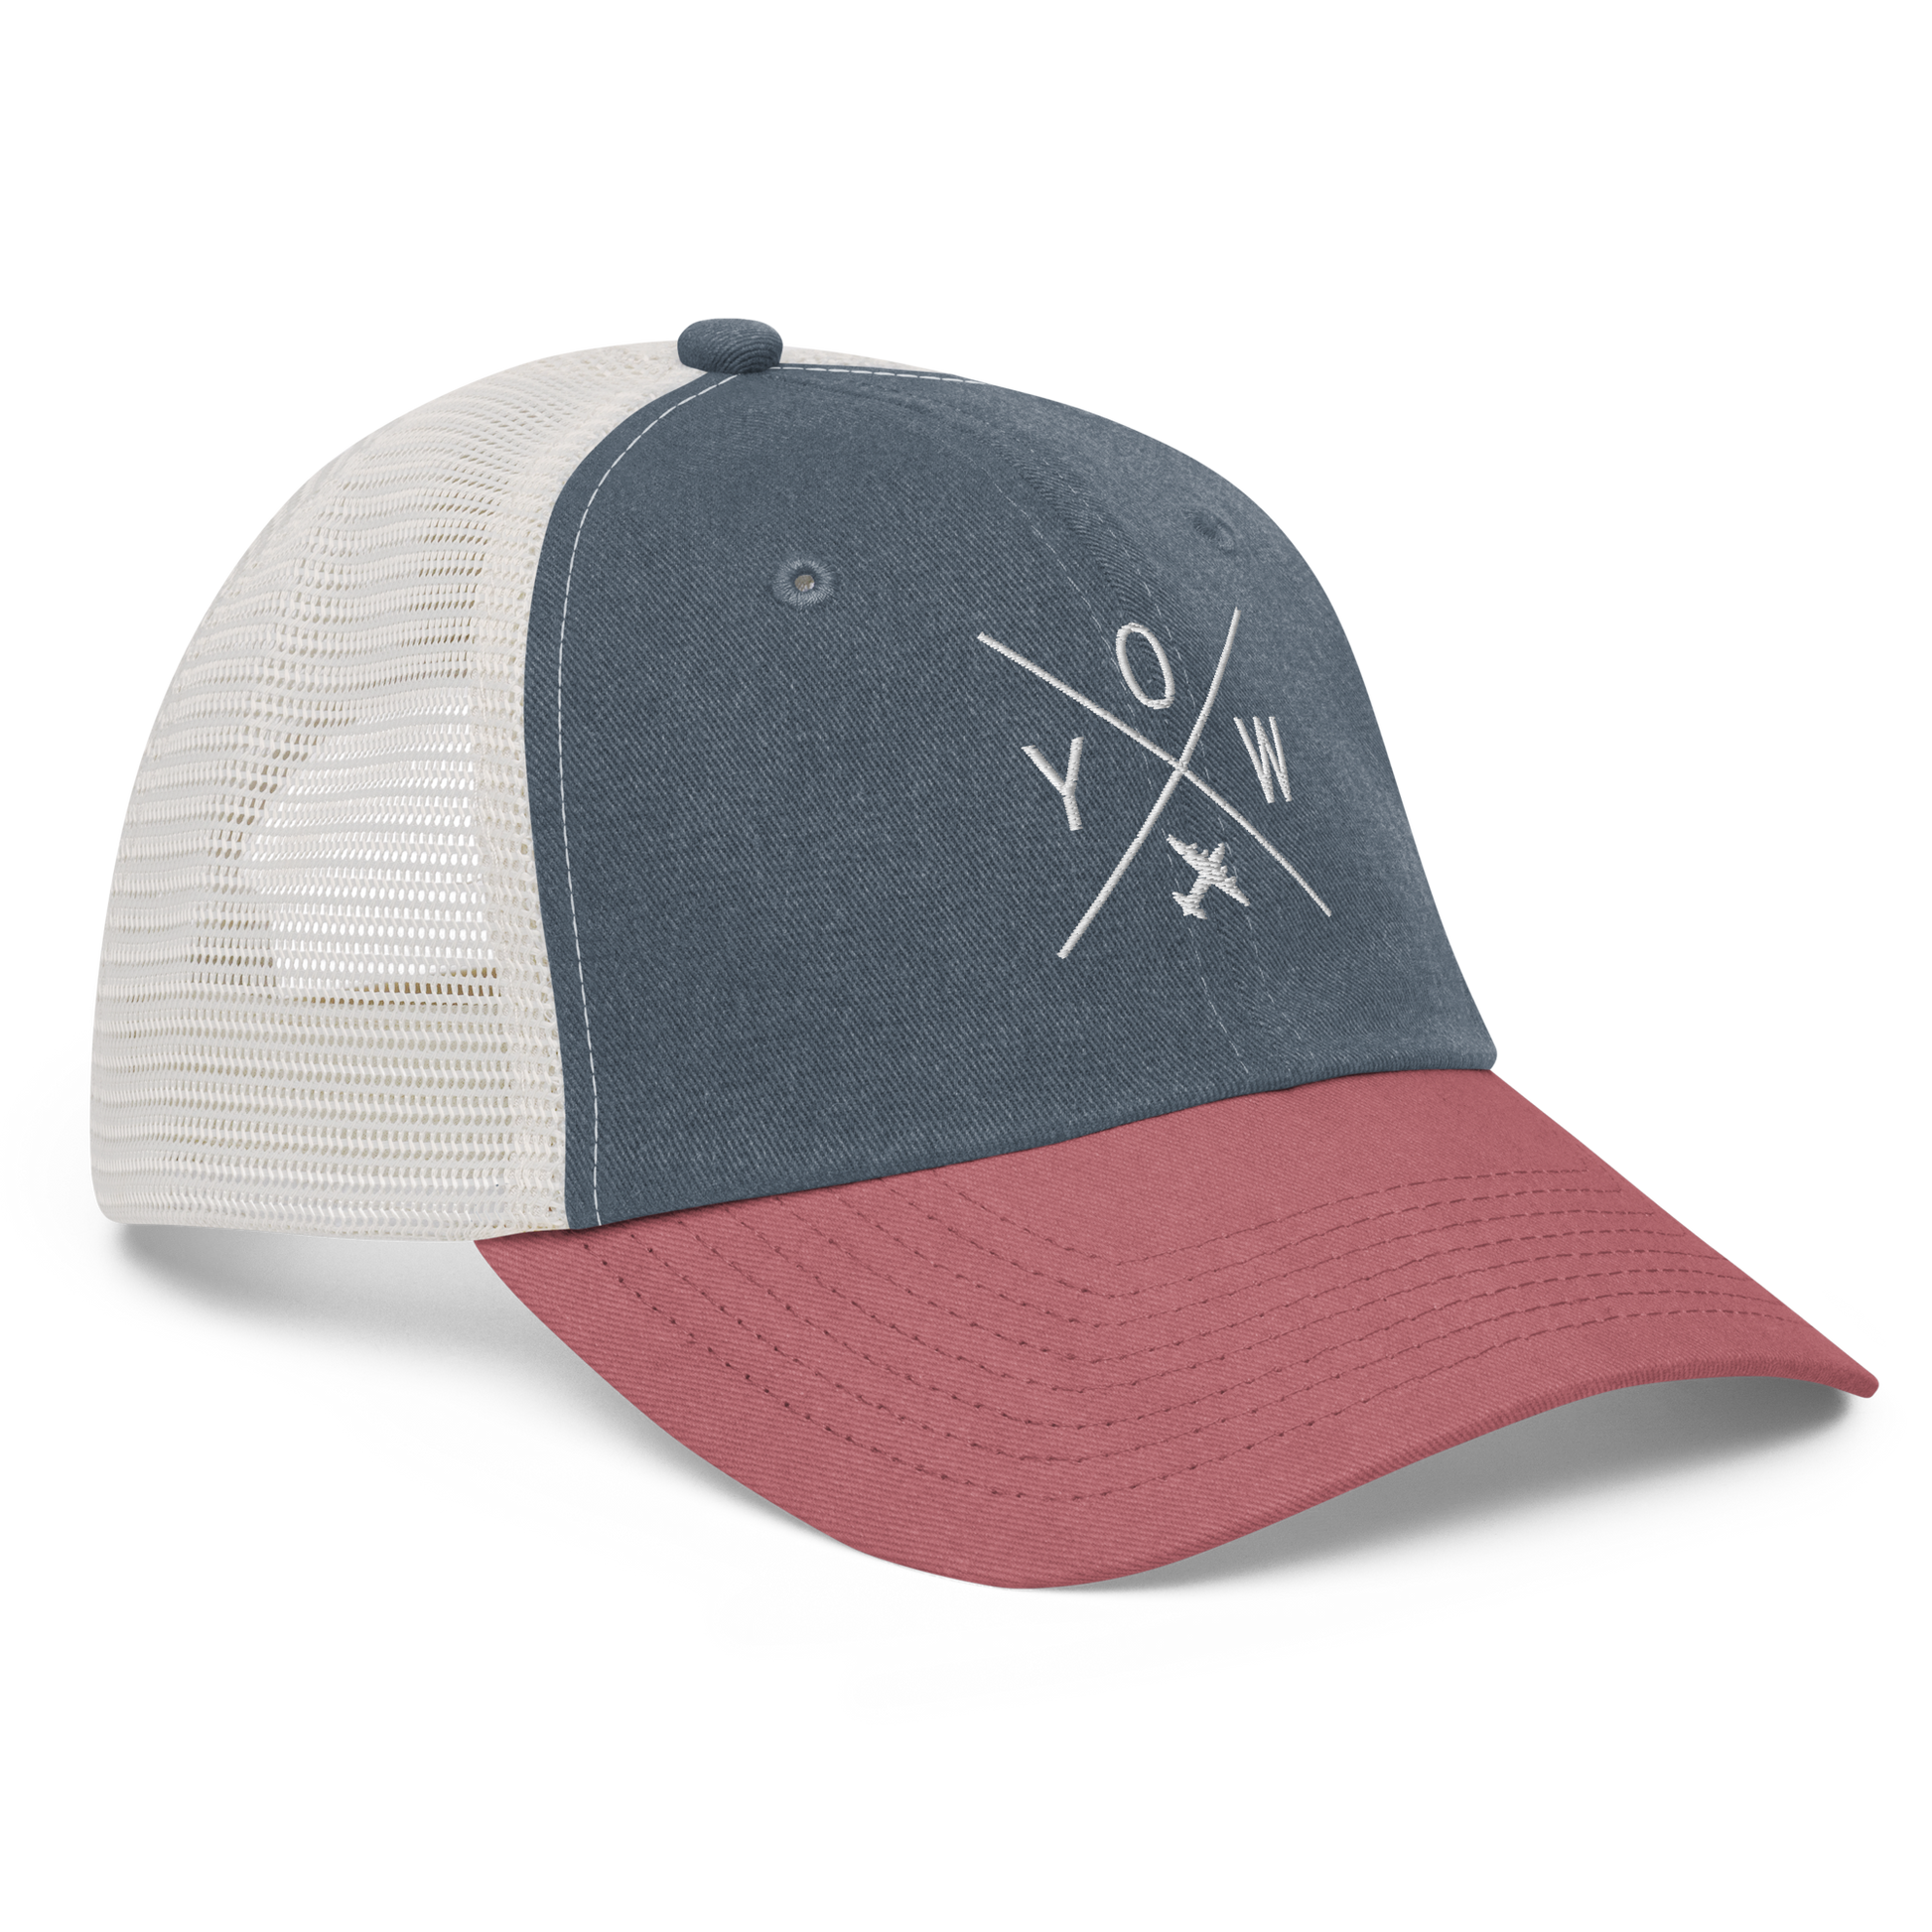 YHM Designs - YOW Ottawa Pigment-Dyed Trucker Cap - Crossed-X Design with Airport Code and Vintage Propliner - White Embroidery - Image 13